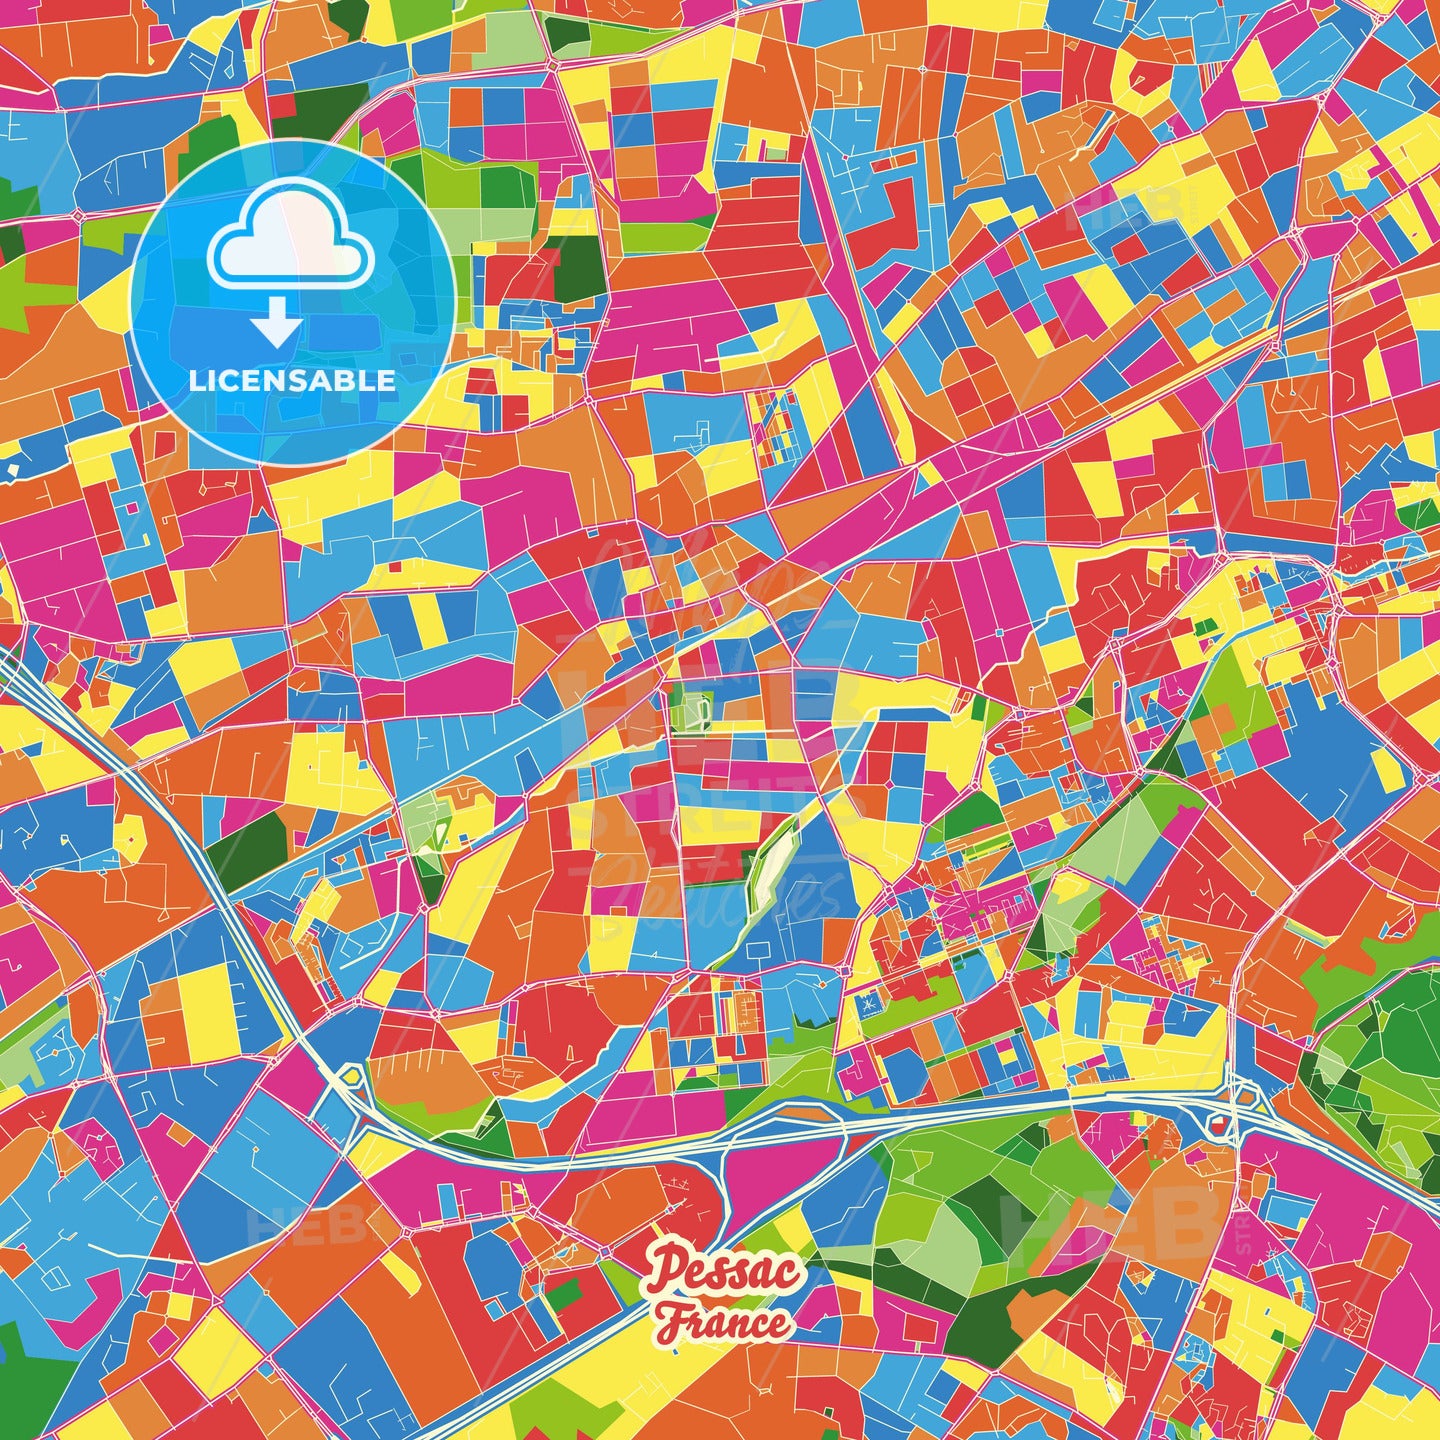 Pessac, France Crazy Colorful Street Map Poster Template - HEBSTREITS Sketches